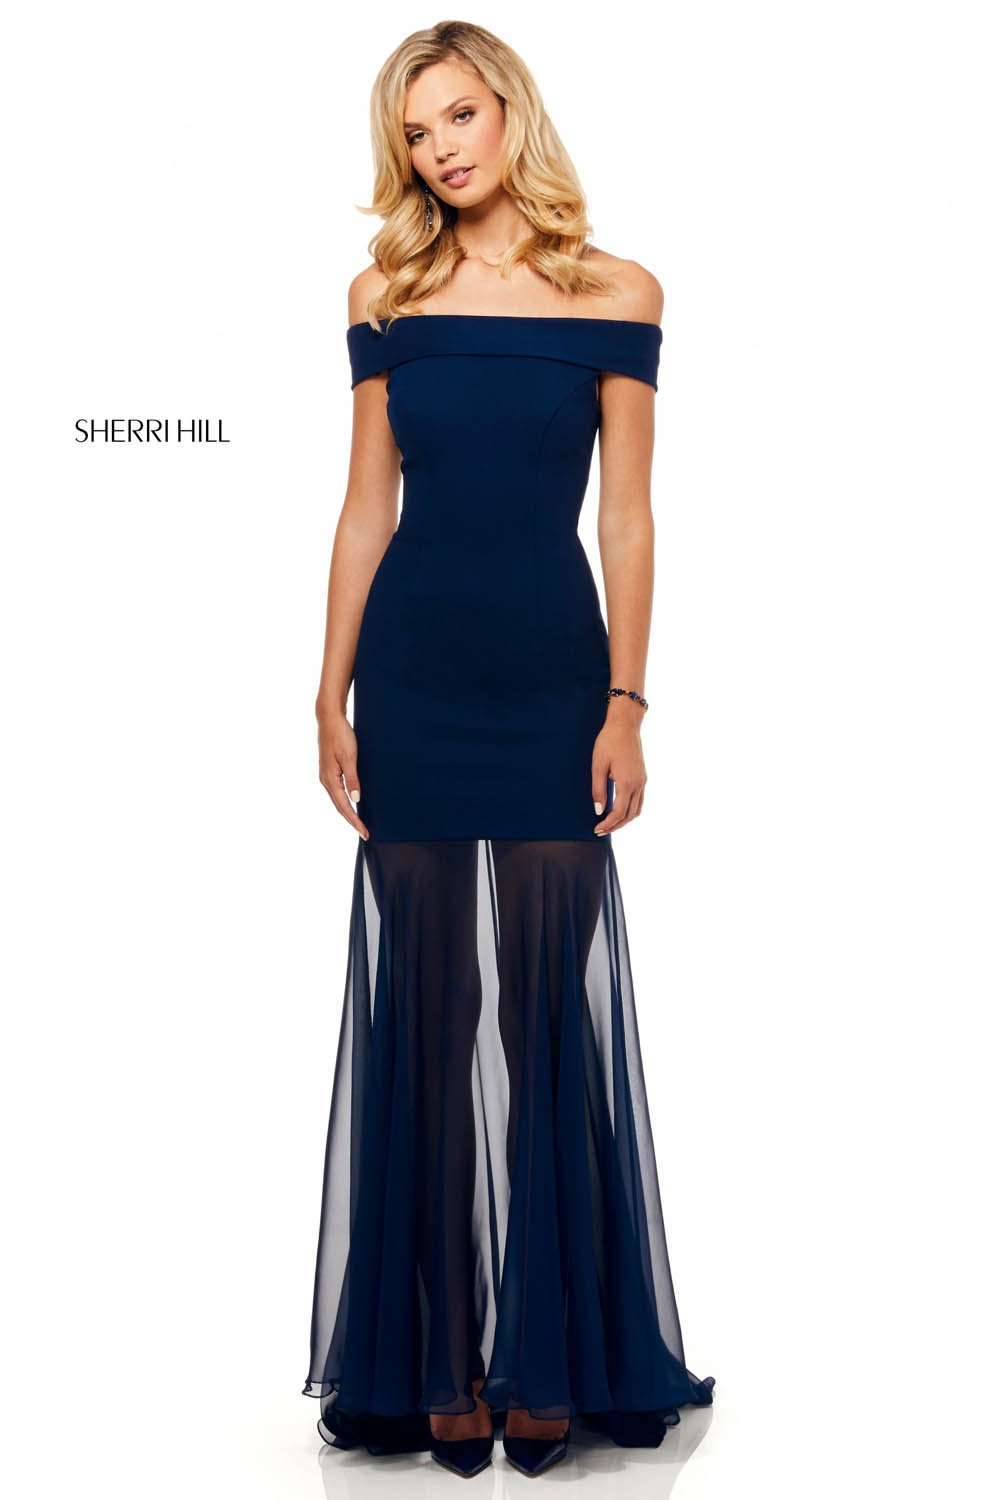 Sherri Hill 52482 dress images in these colors: Ivory, Yellow, Black, Navy, Red, Wine.